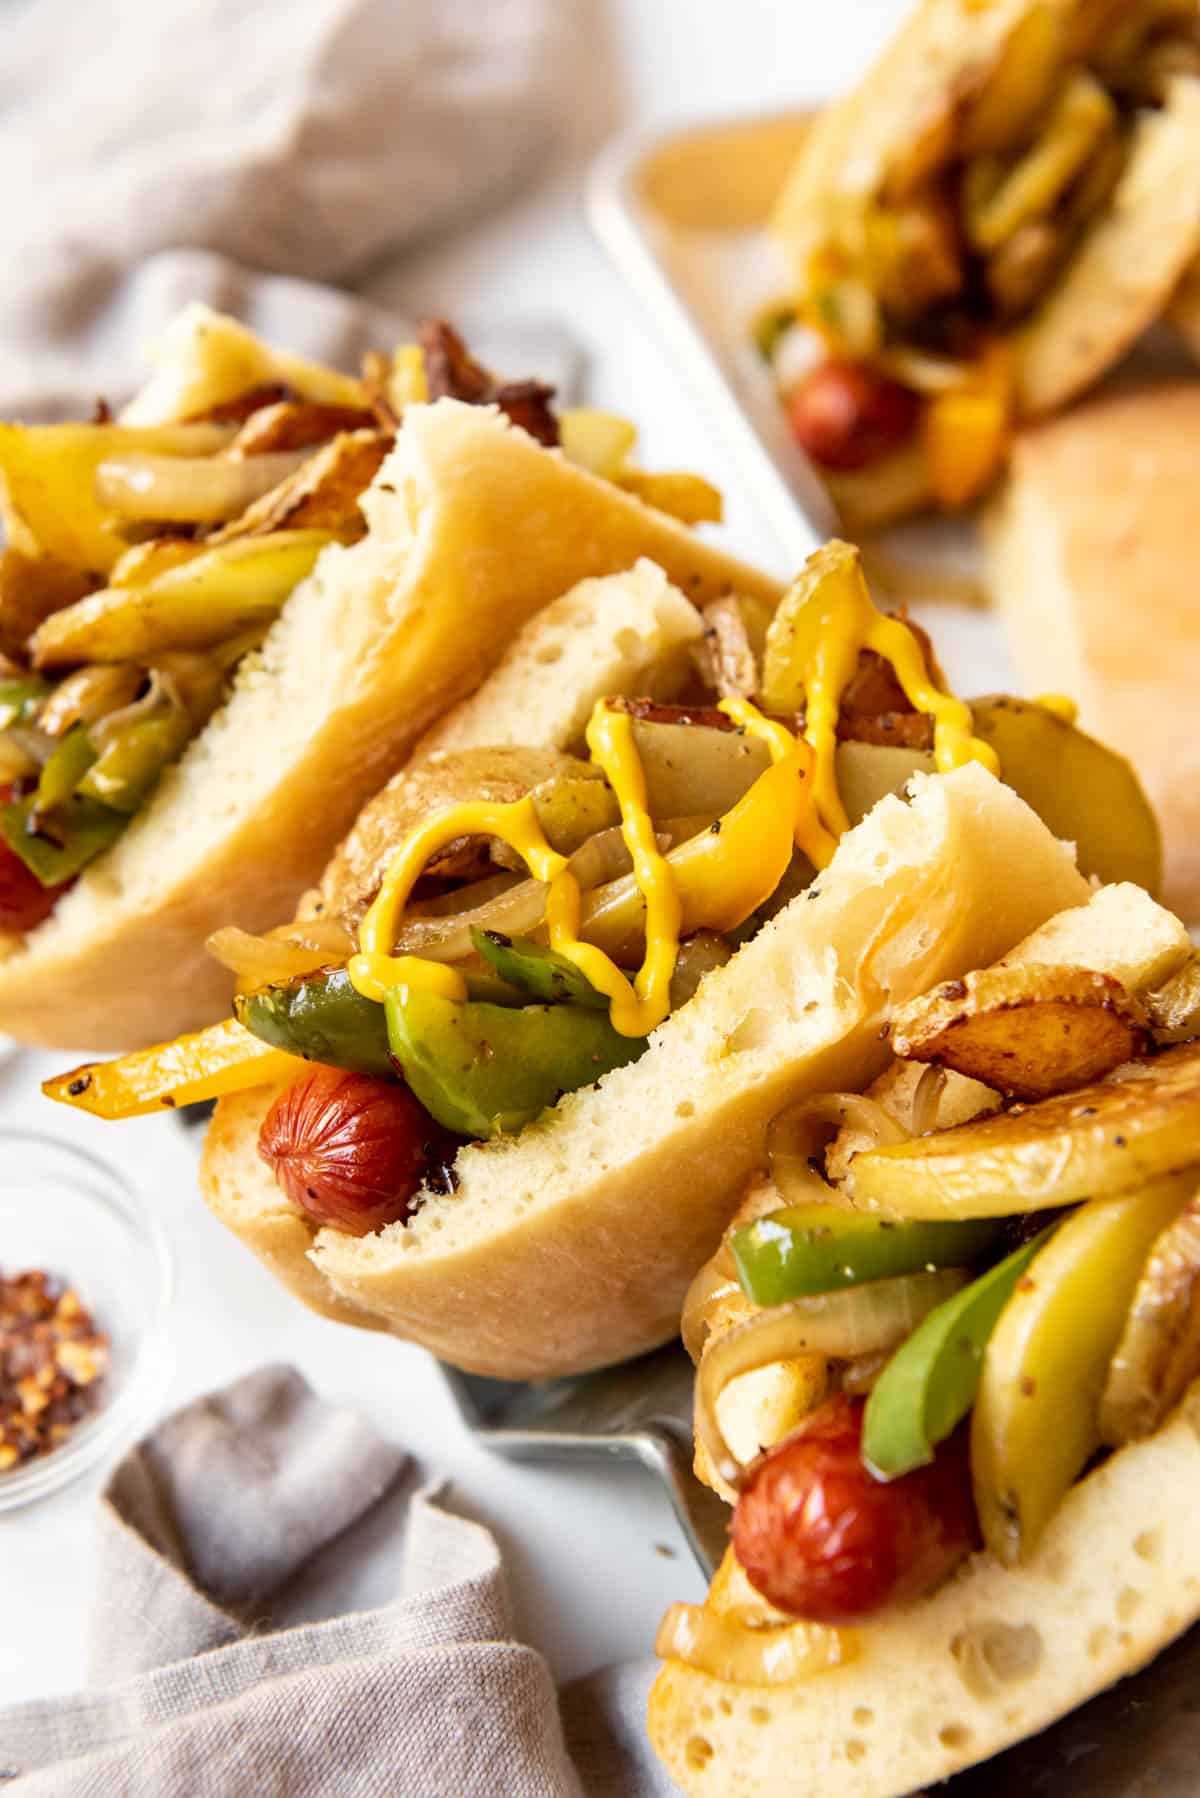 Homemade New Jersey Italian hot dogs topped with peppers, onions, potatoes, and yellow mustard.